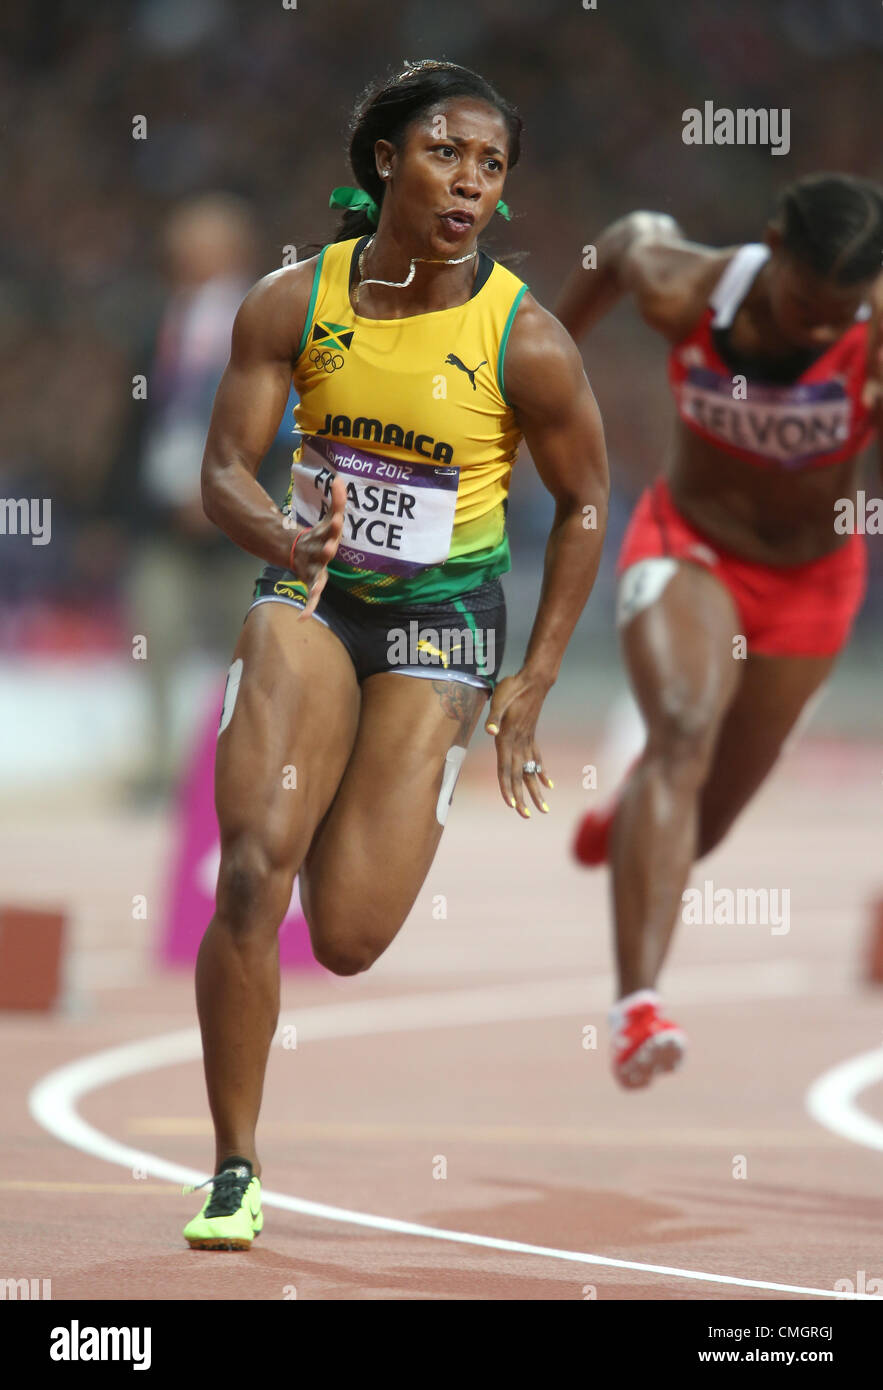 SHELLY-ANN FRASER-PRYCE 2012 OLYMPIC GAMES Stock Photo